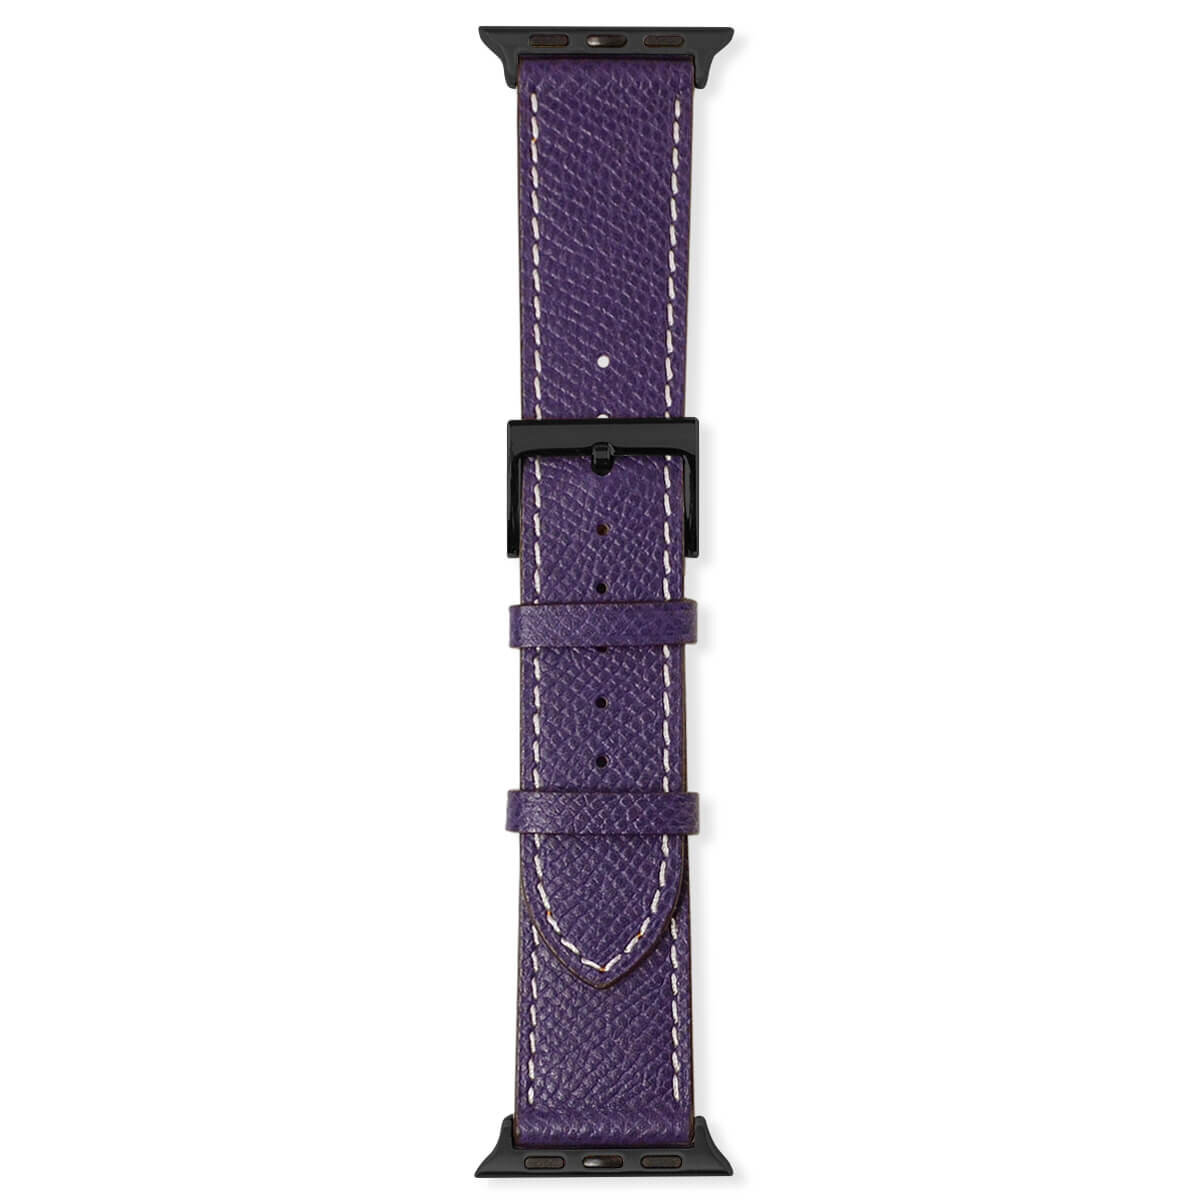 38mm/40mm/41mm Apple Watch Strap - Calf Leather Band (Purple Blue)